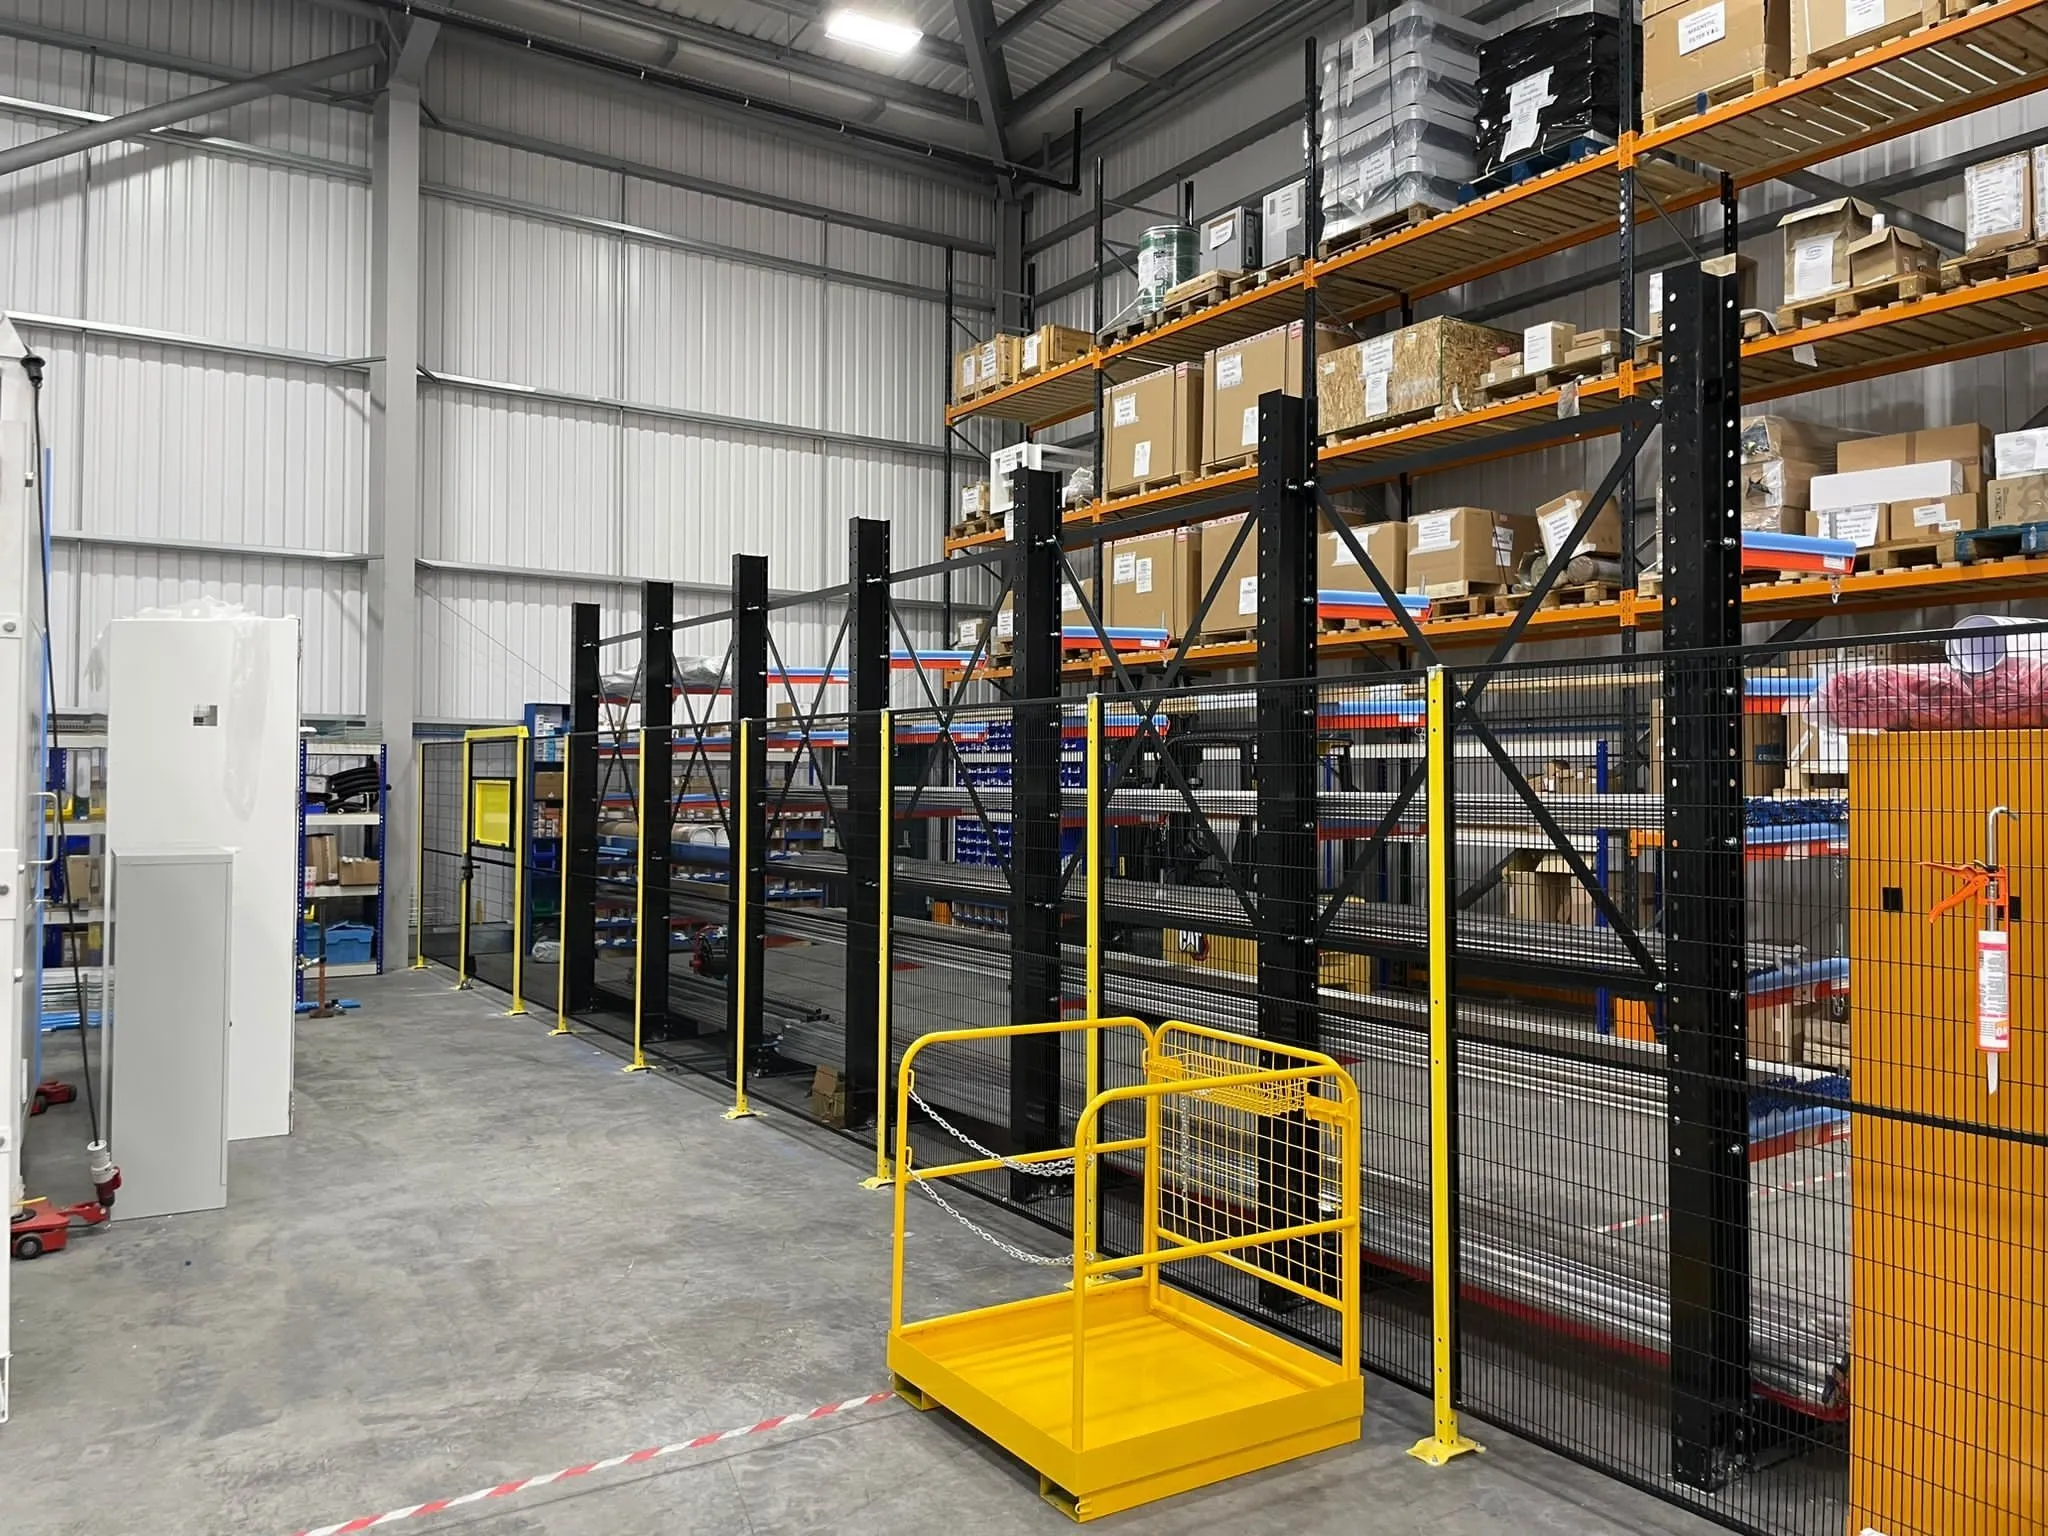 UK Suppliers of Mezzanine Safety Fencing